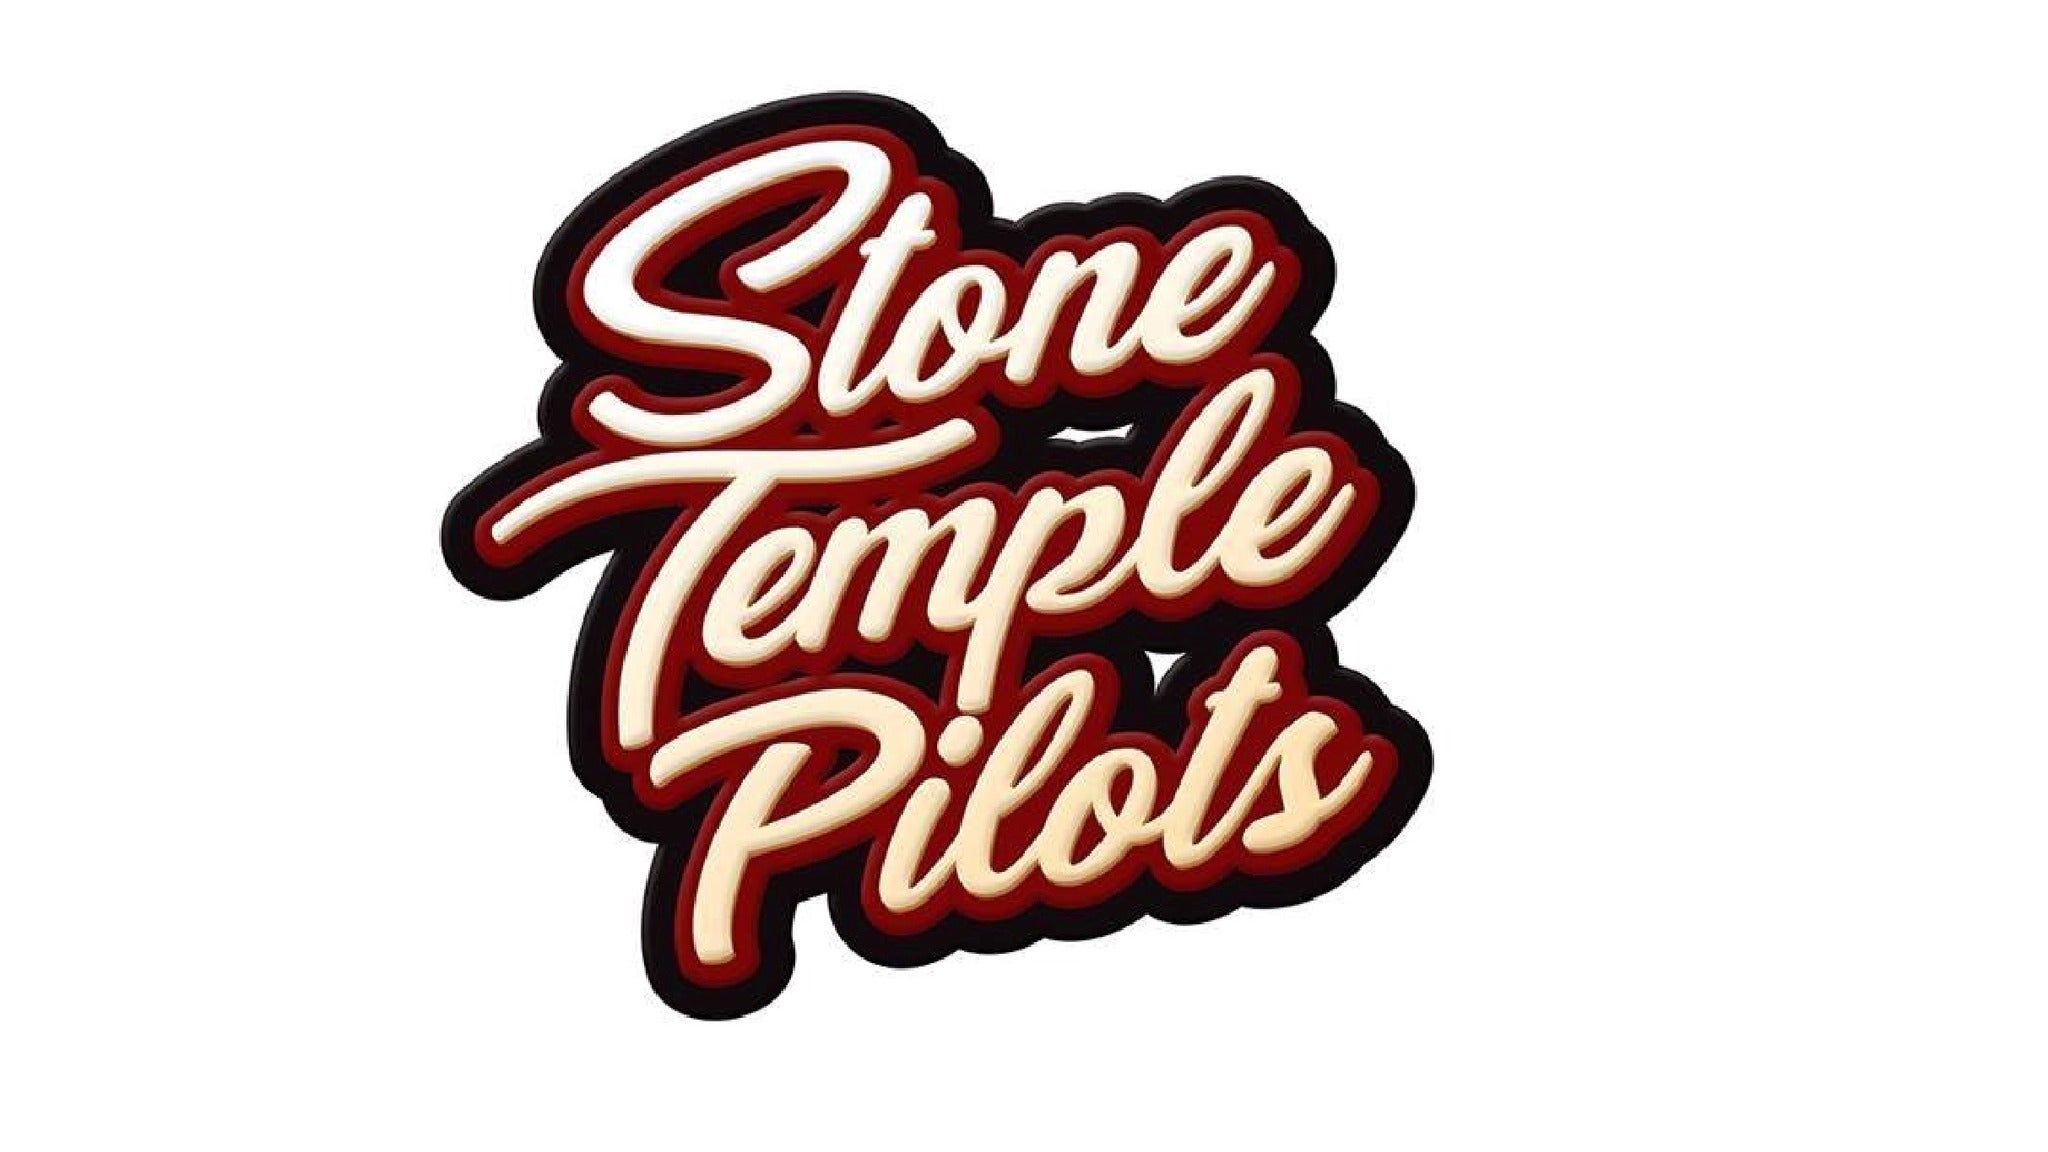 Stone Temple Pilots And Rival Sons Houston Tx Aarp